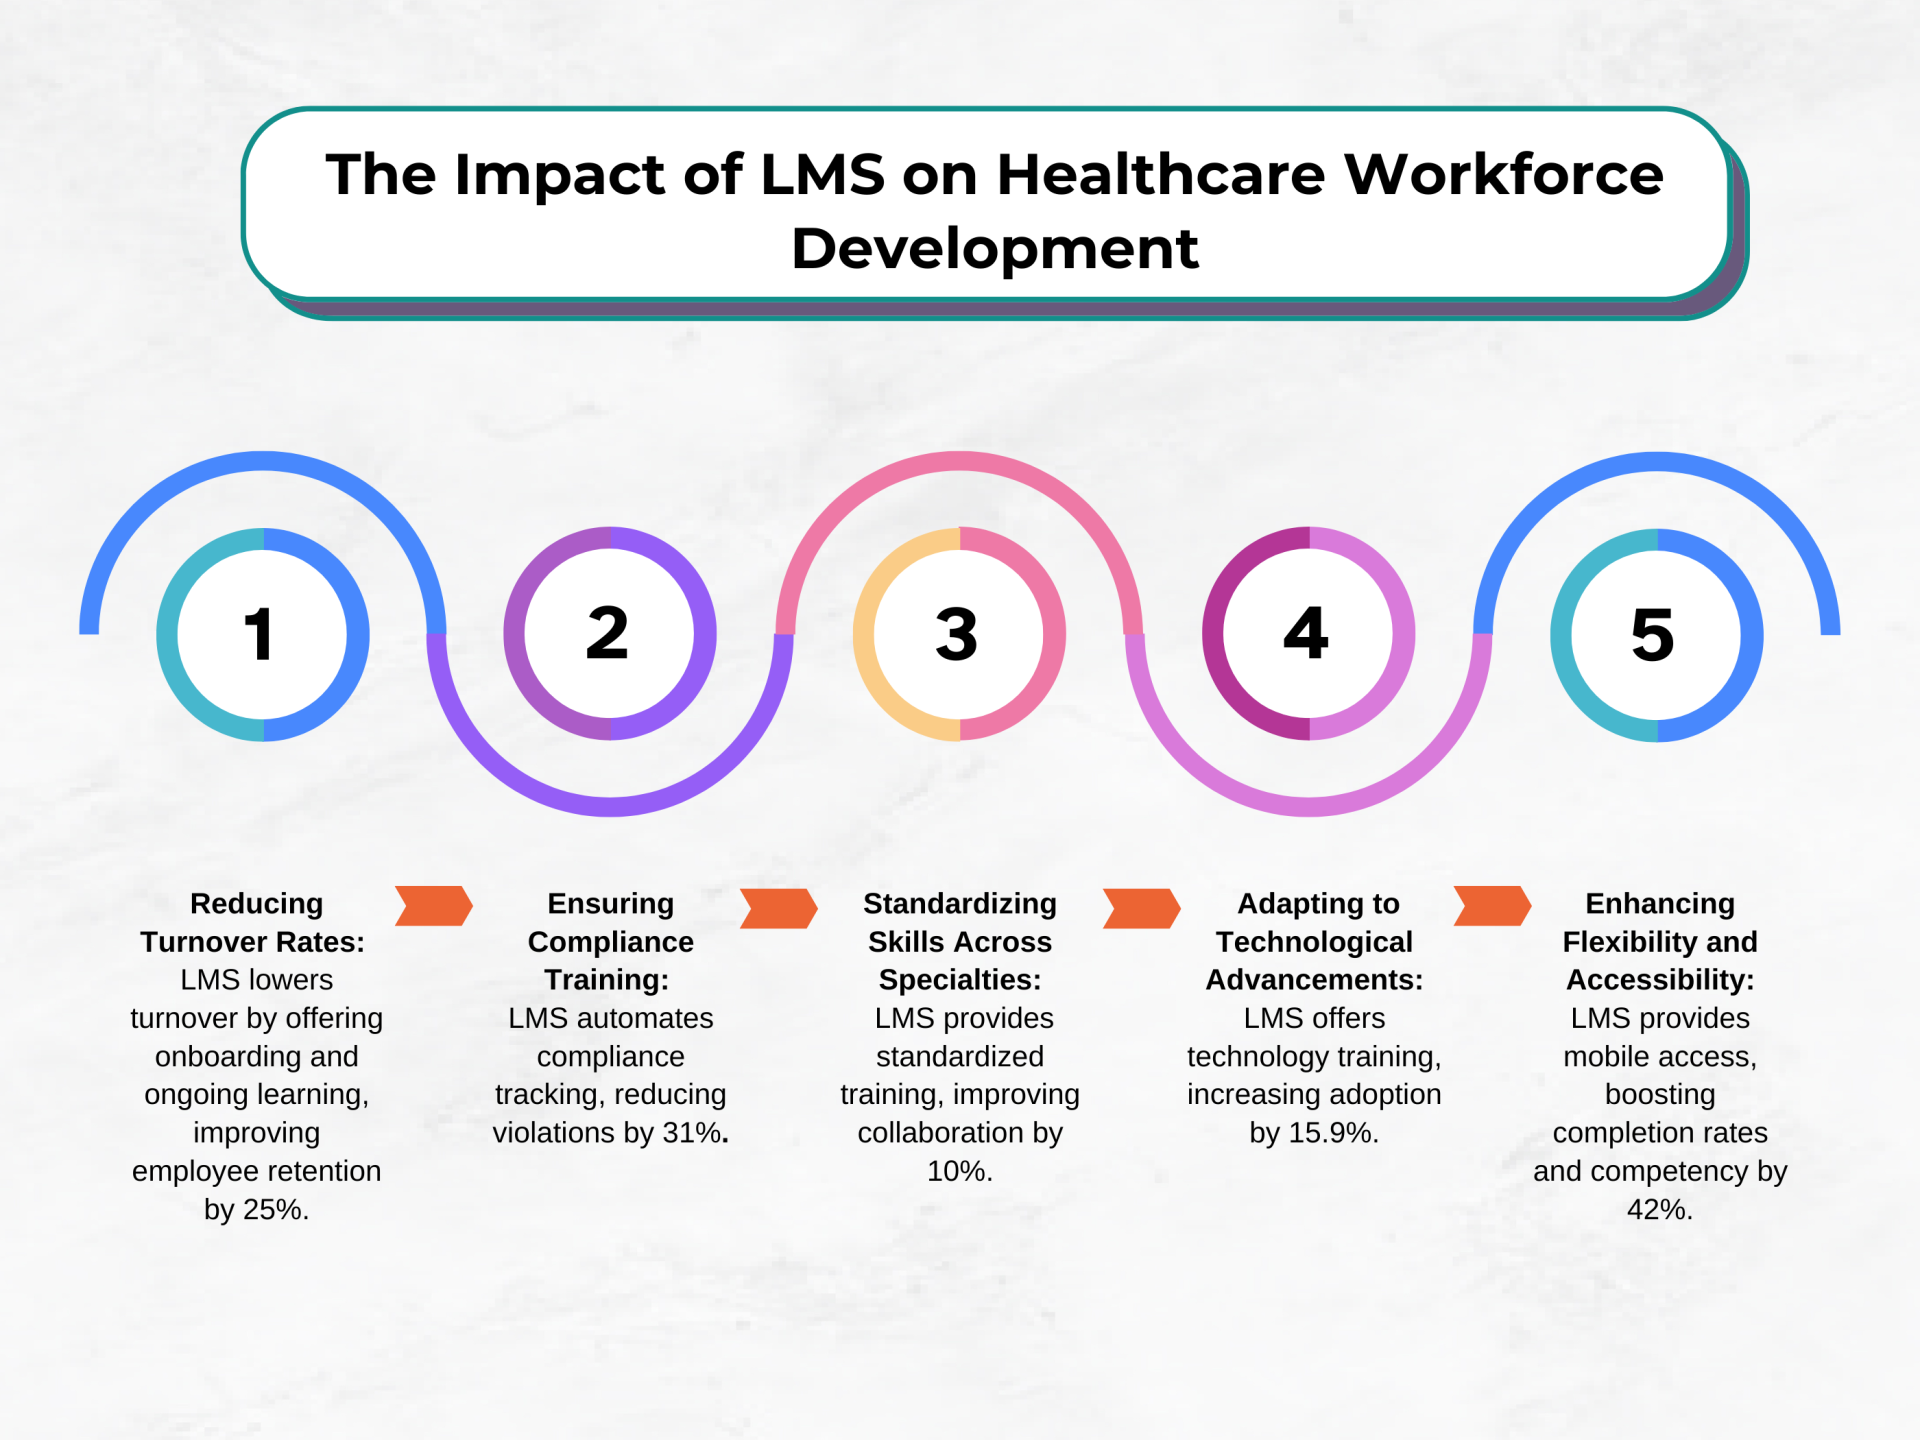 The Impact of LMS on Healthcare Workforce Development